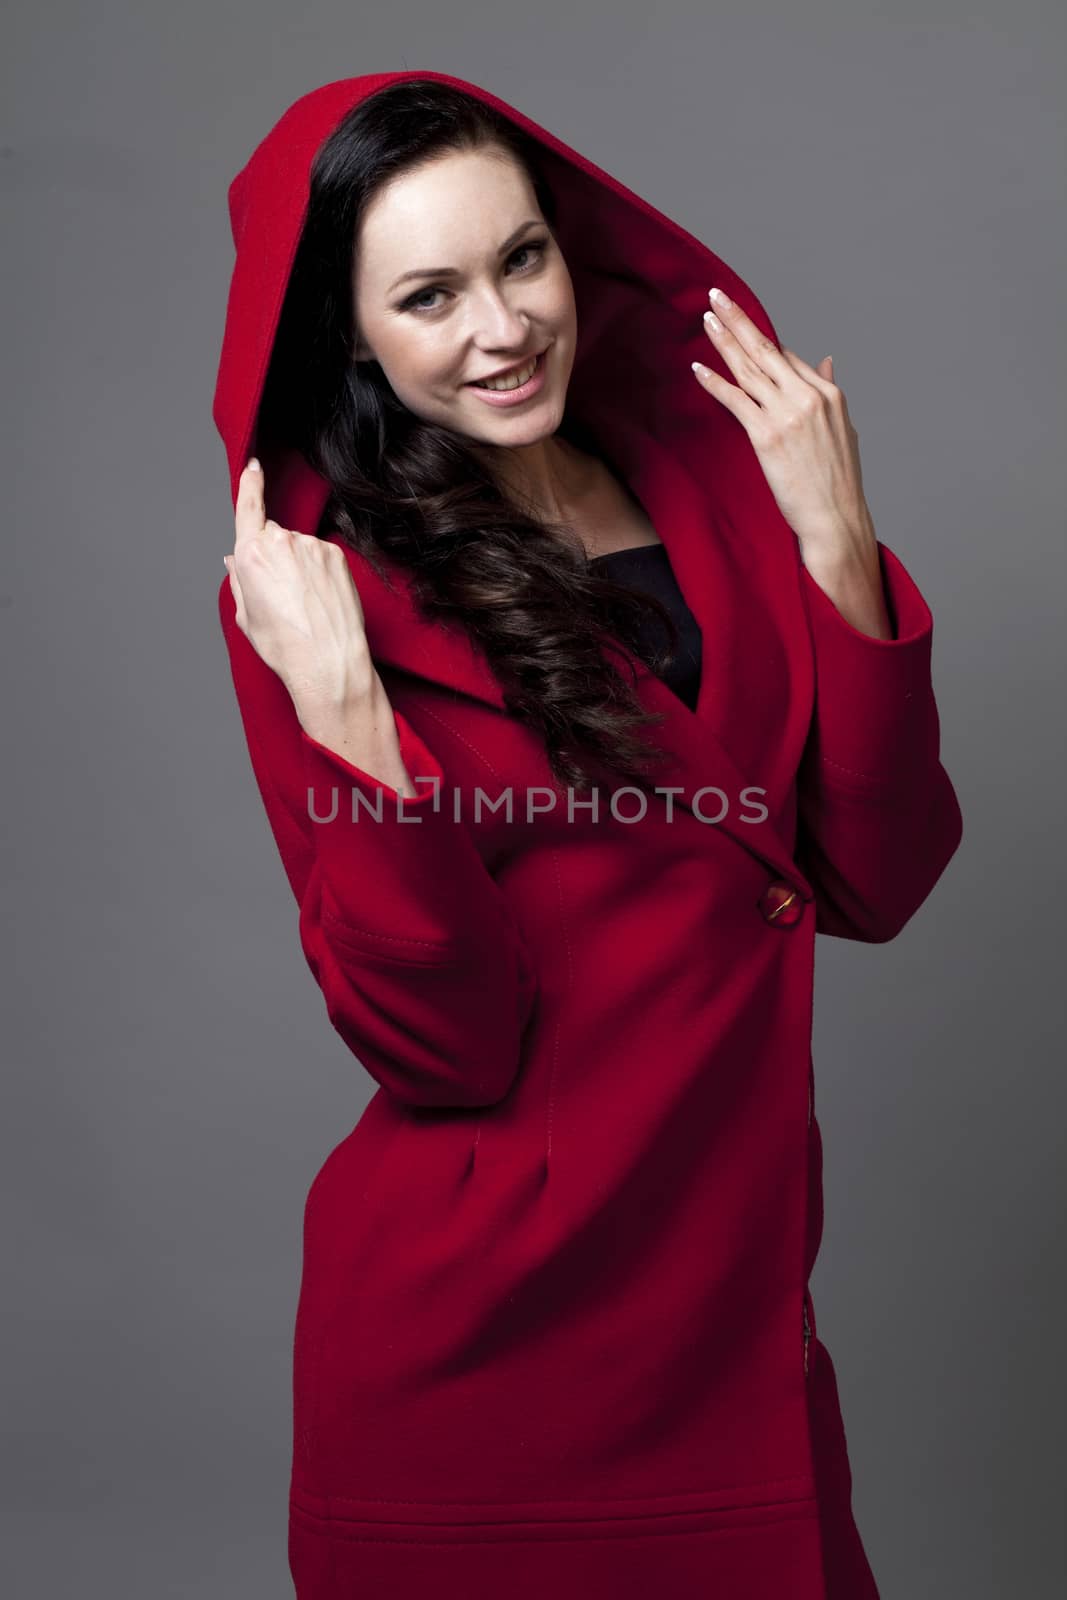 Beautiful young woman in a red coat with hood